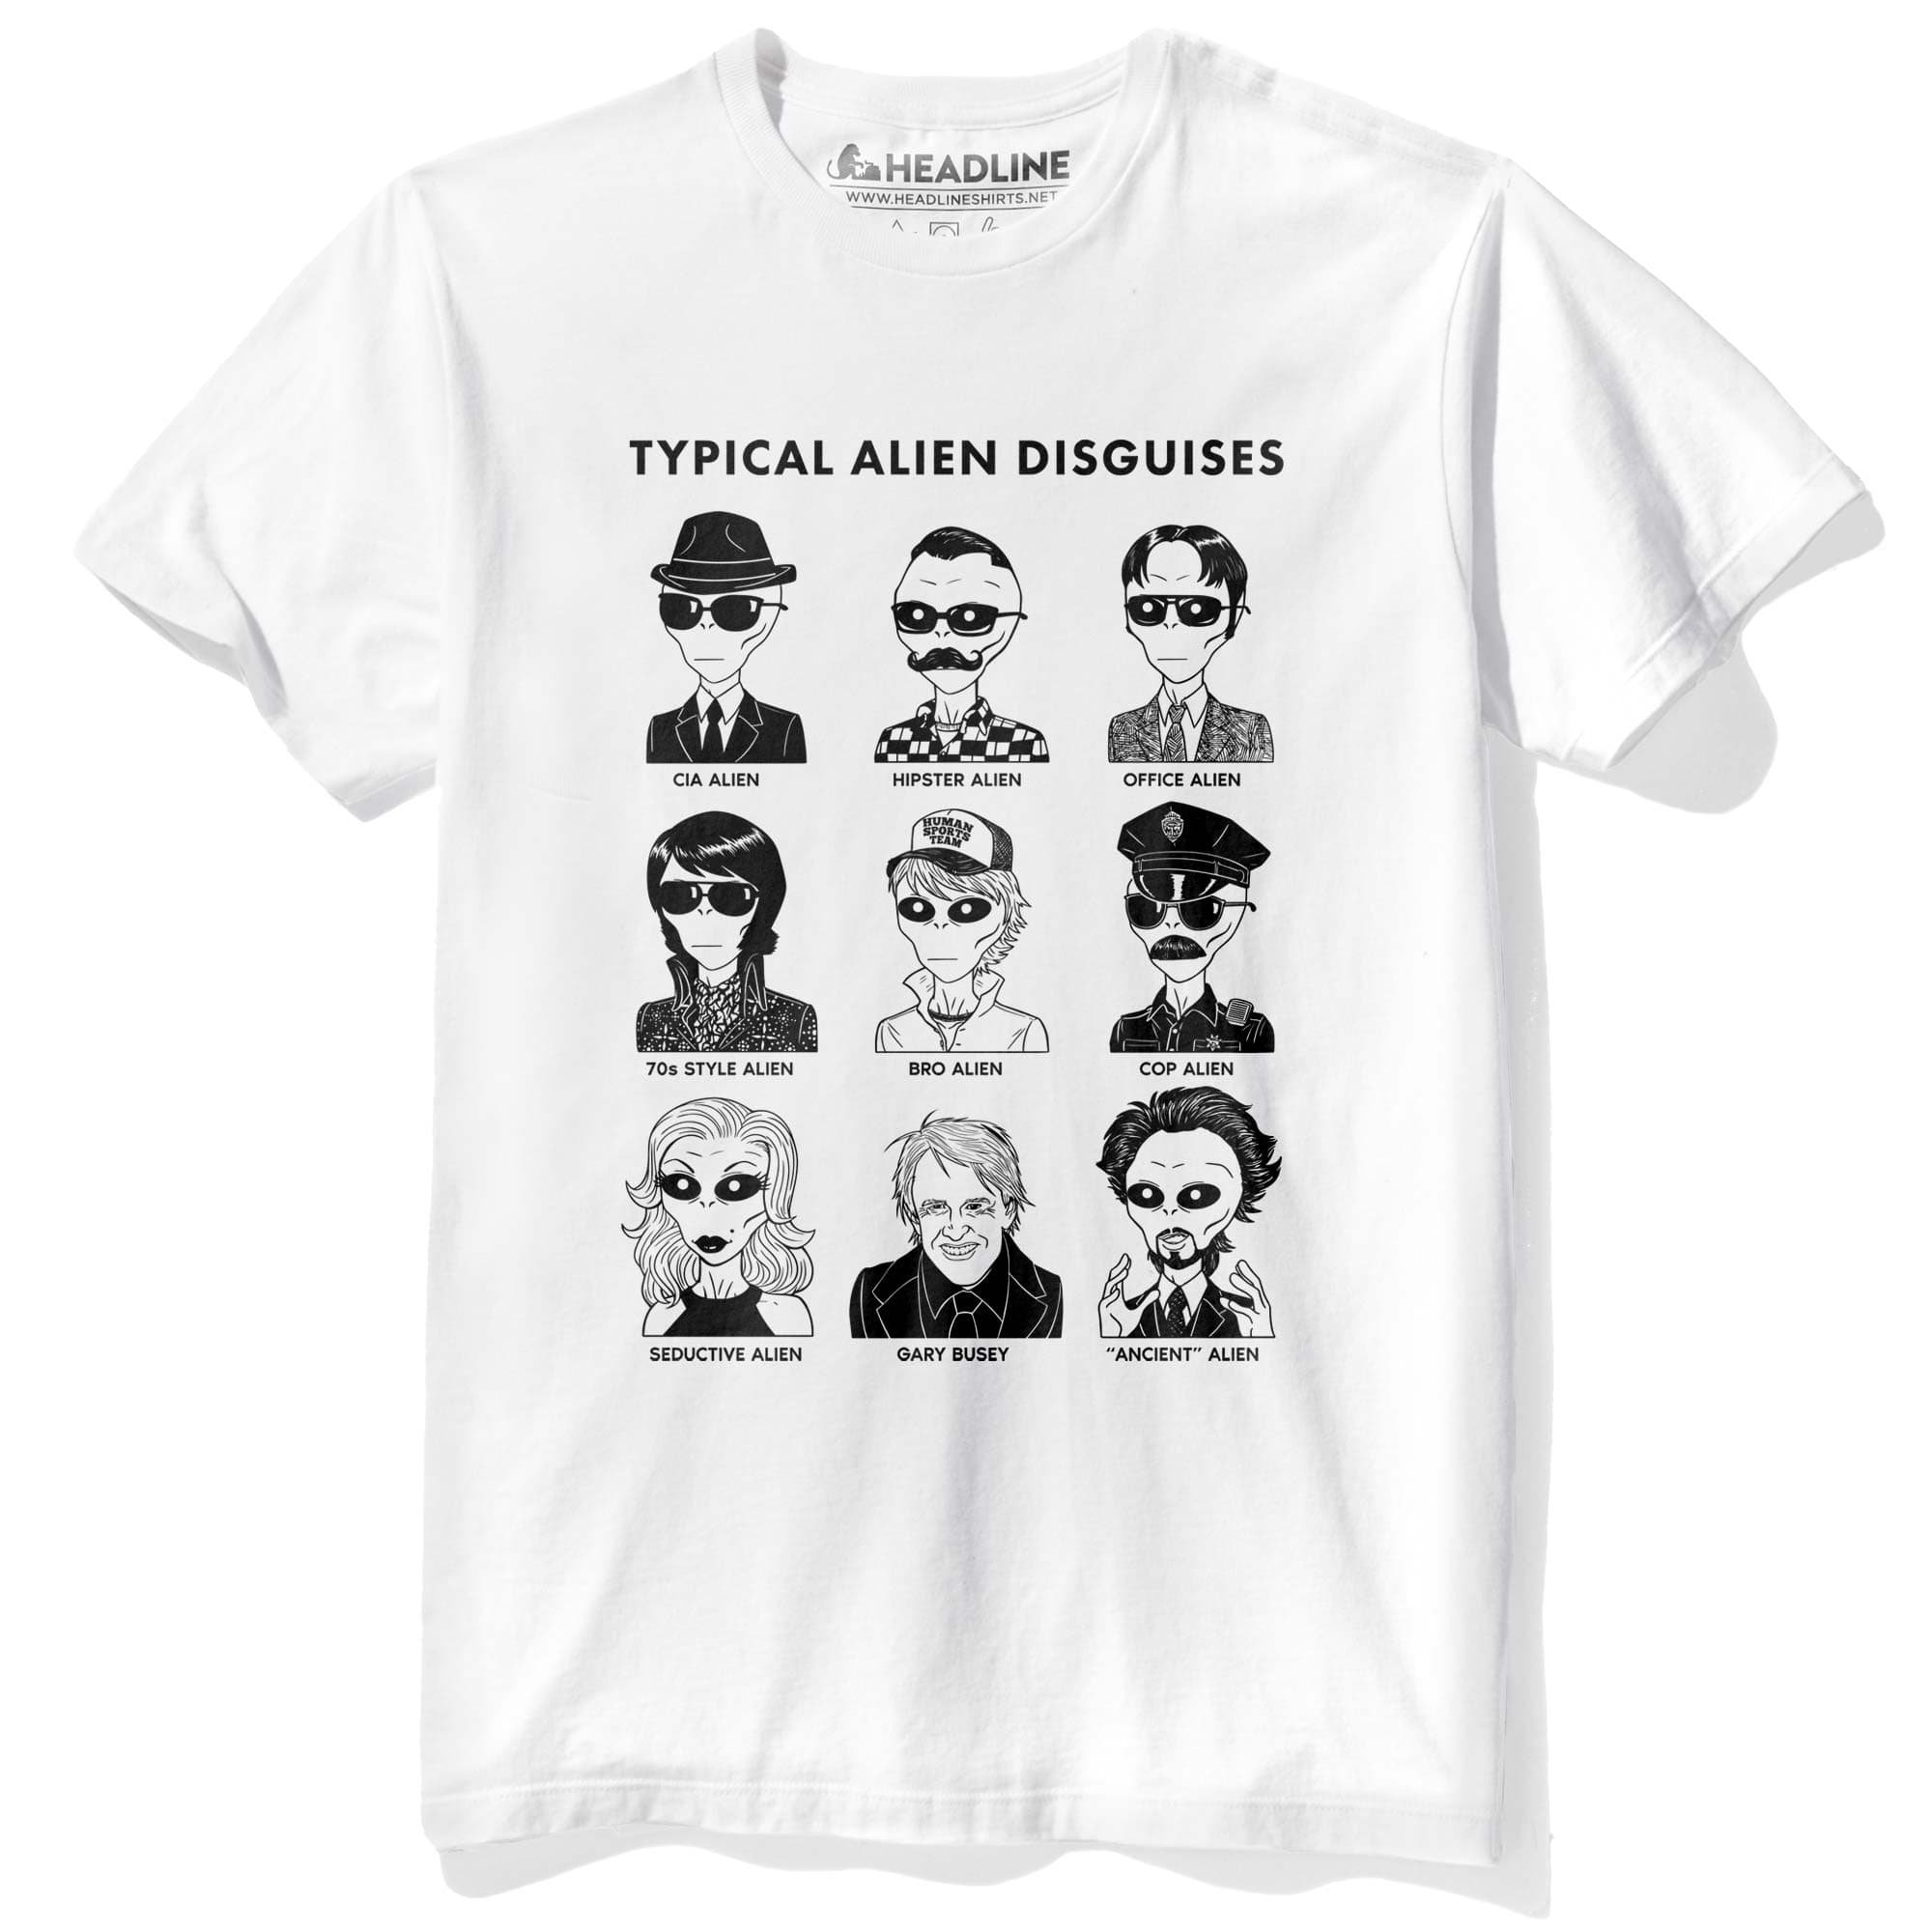 Men's Typical Alien Disguises Funny Sci Fi Graphic T-Shirt | Cool UFO Conspiracy Tee | Solid Threads